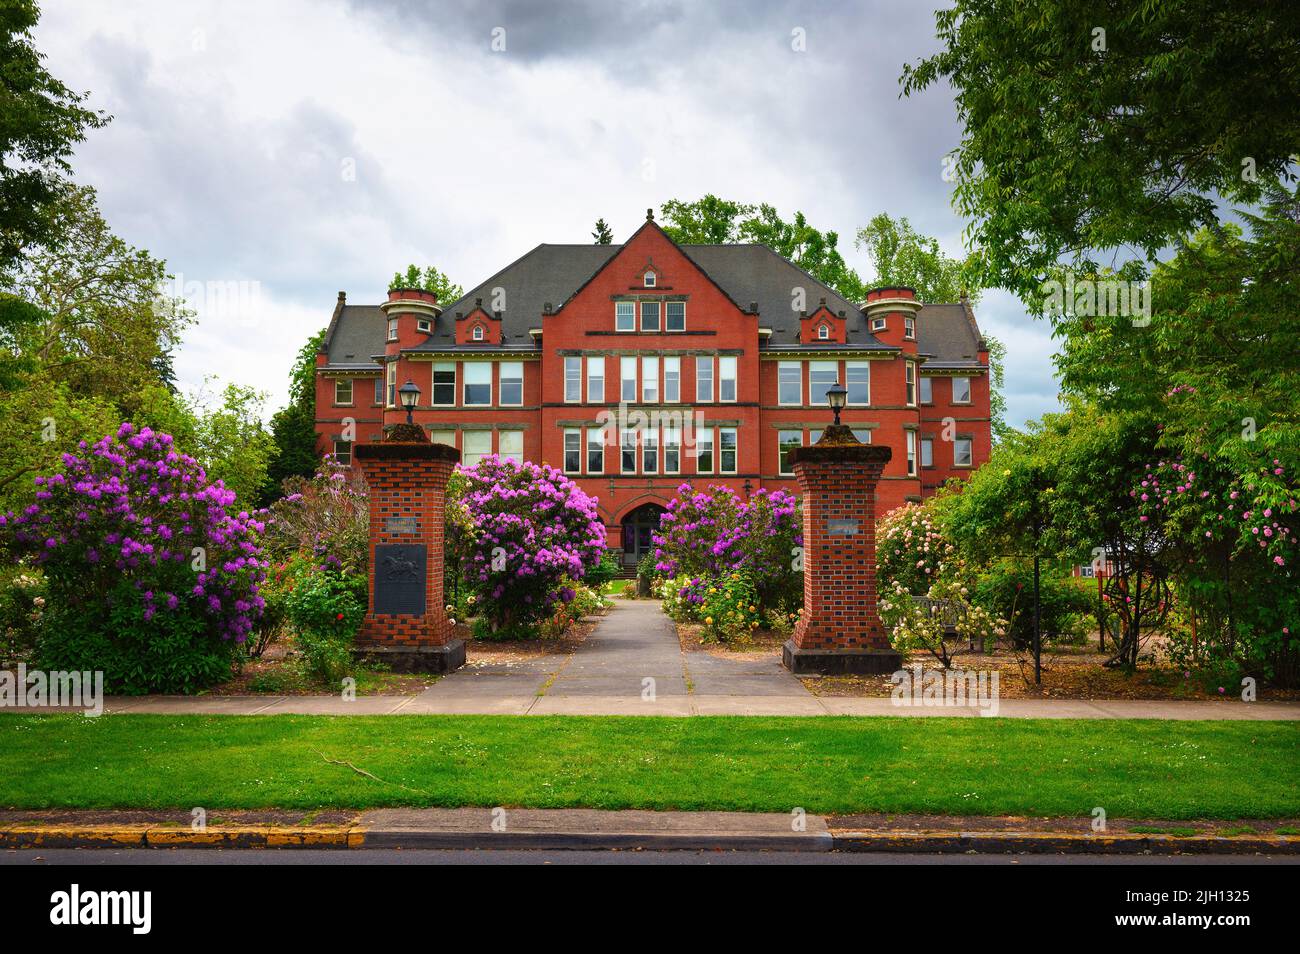 Eaton Hall, building on the campus of Willamette University in Salem, Oregon Stock Photo